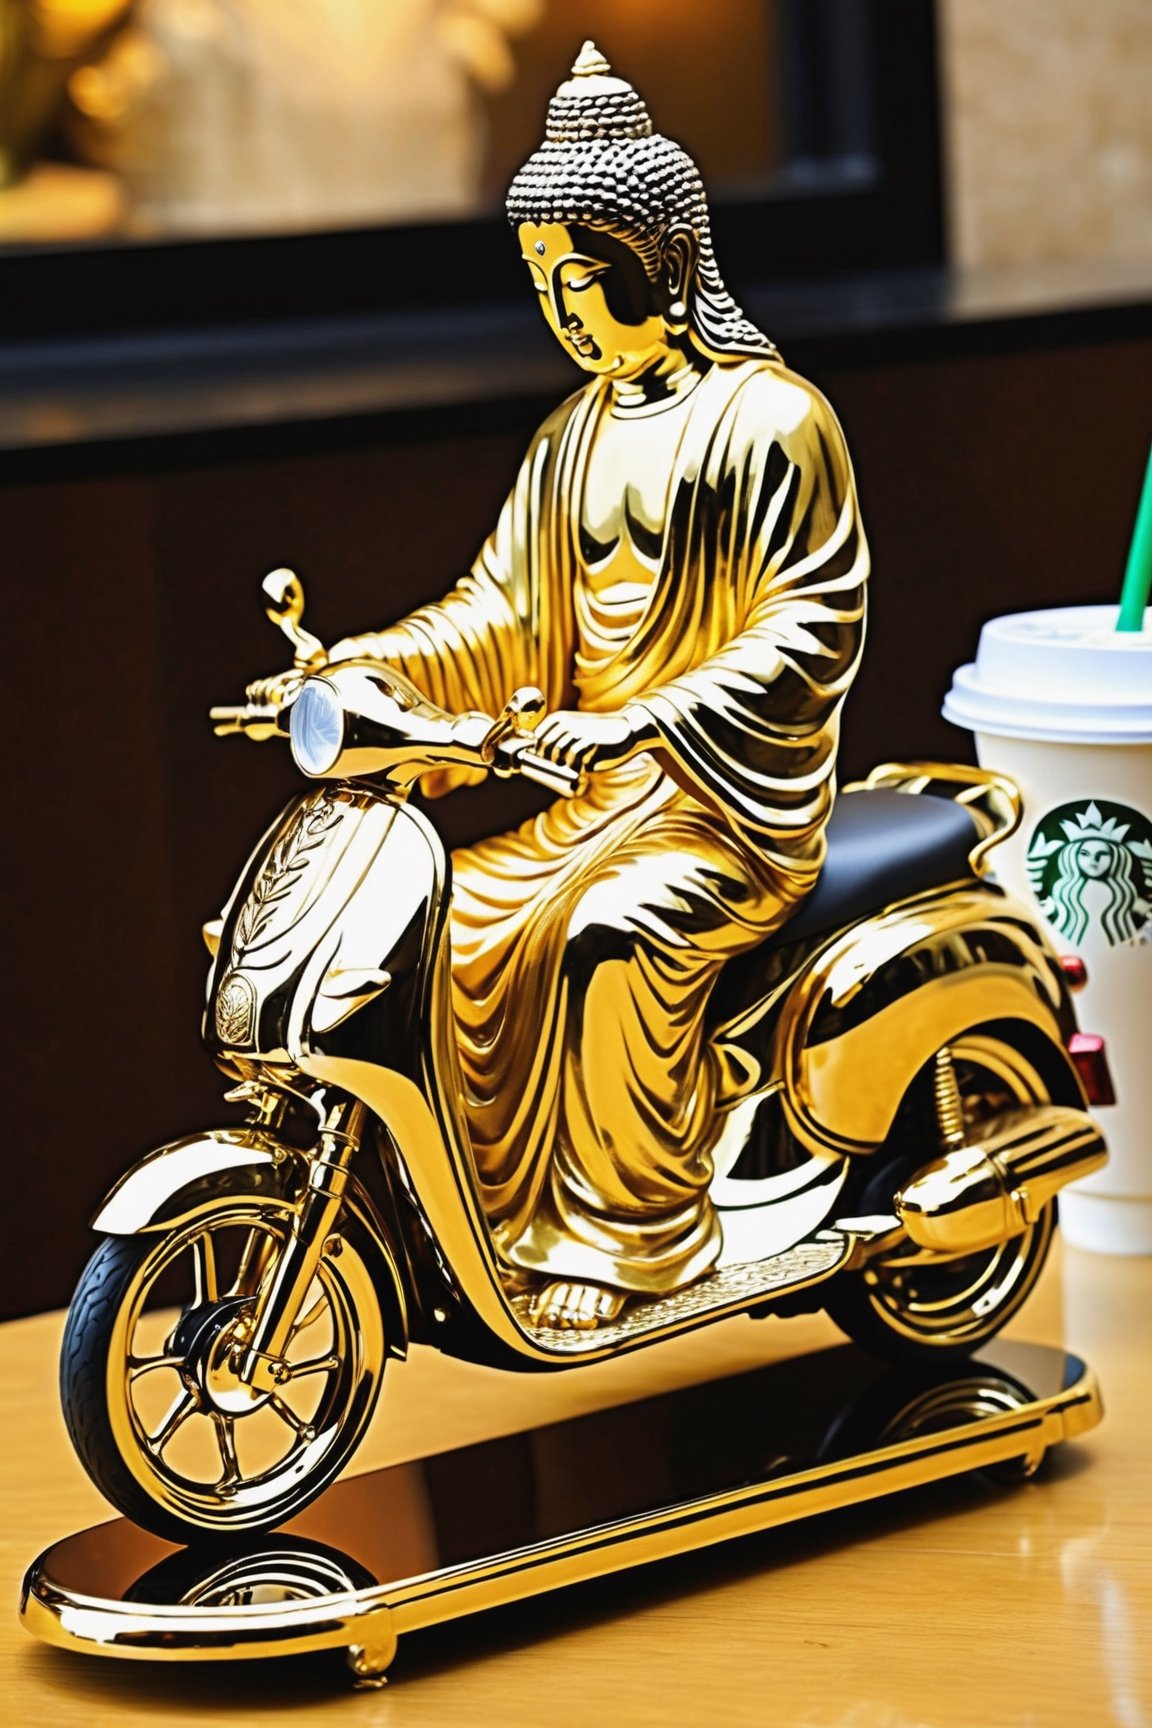 (masterpiece, high detail, best quality),  Bodhisattva riding a scooter,gold chrome Jesus, satin sliver iron, holding lotus,more detail ,beside table in Starbucks coffee store ,